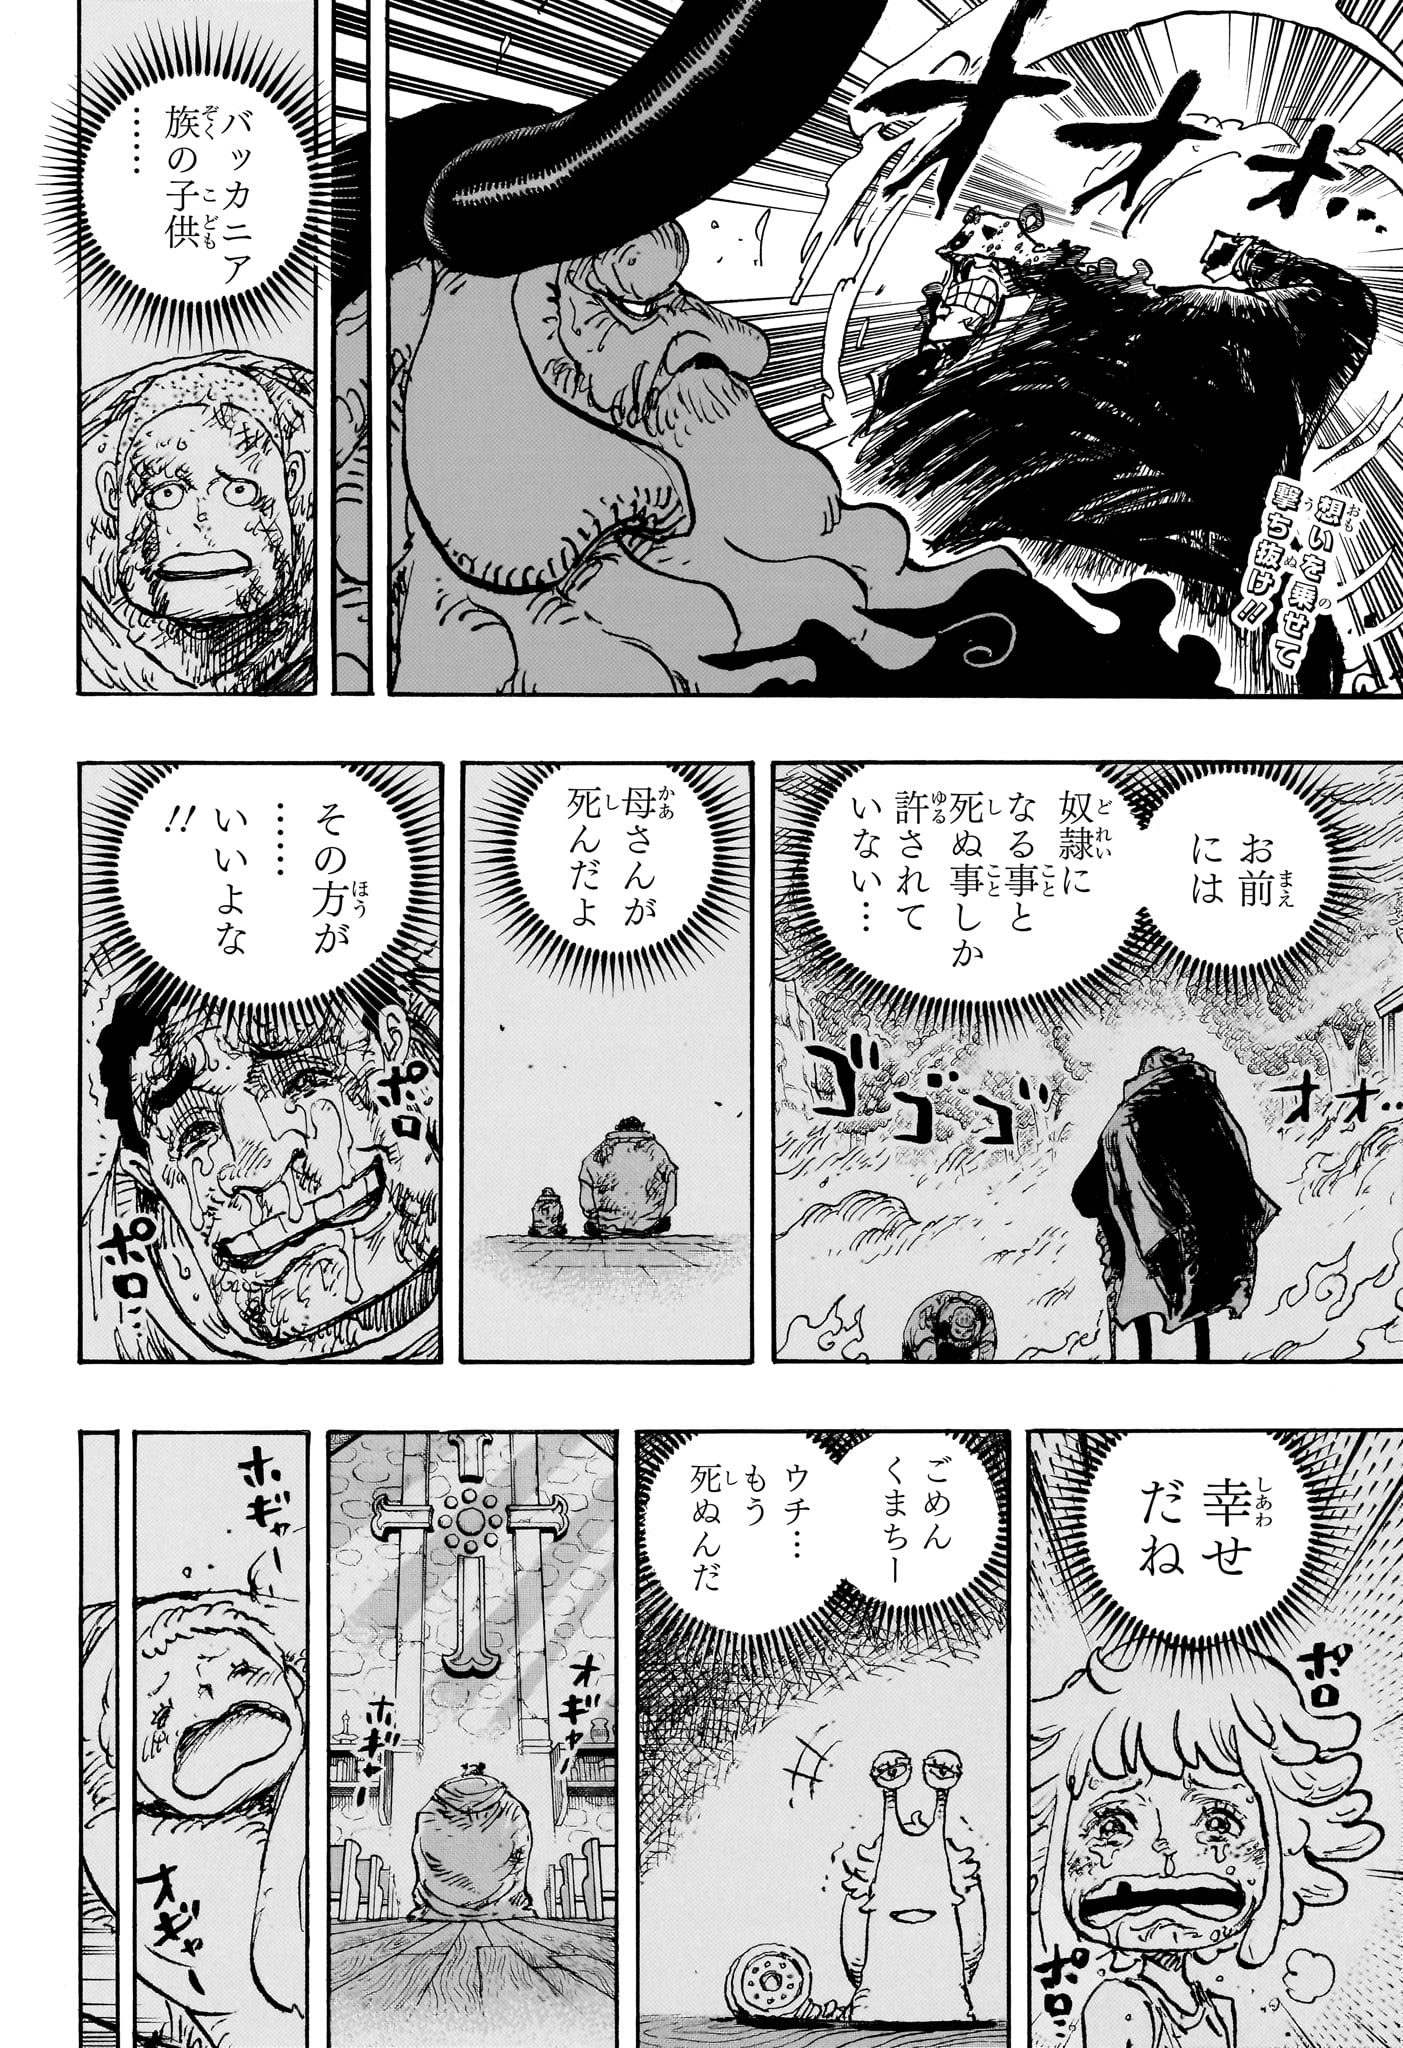 One Piece - Chapter 1104 - Page 2